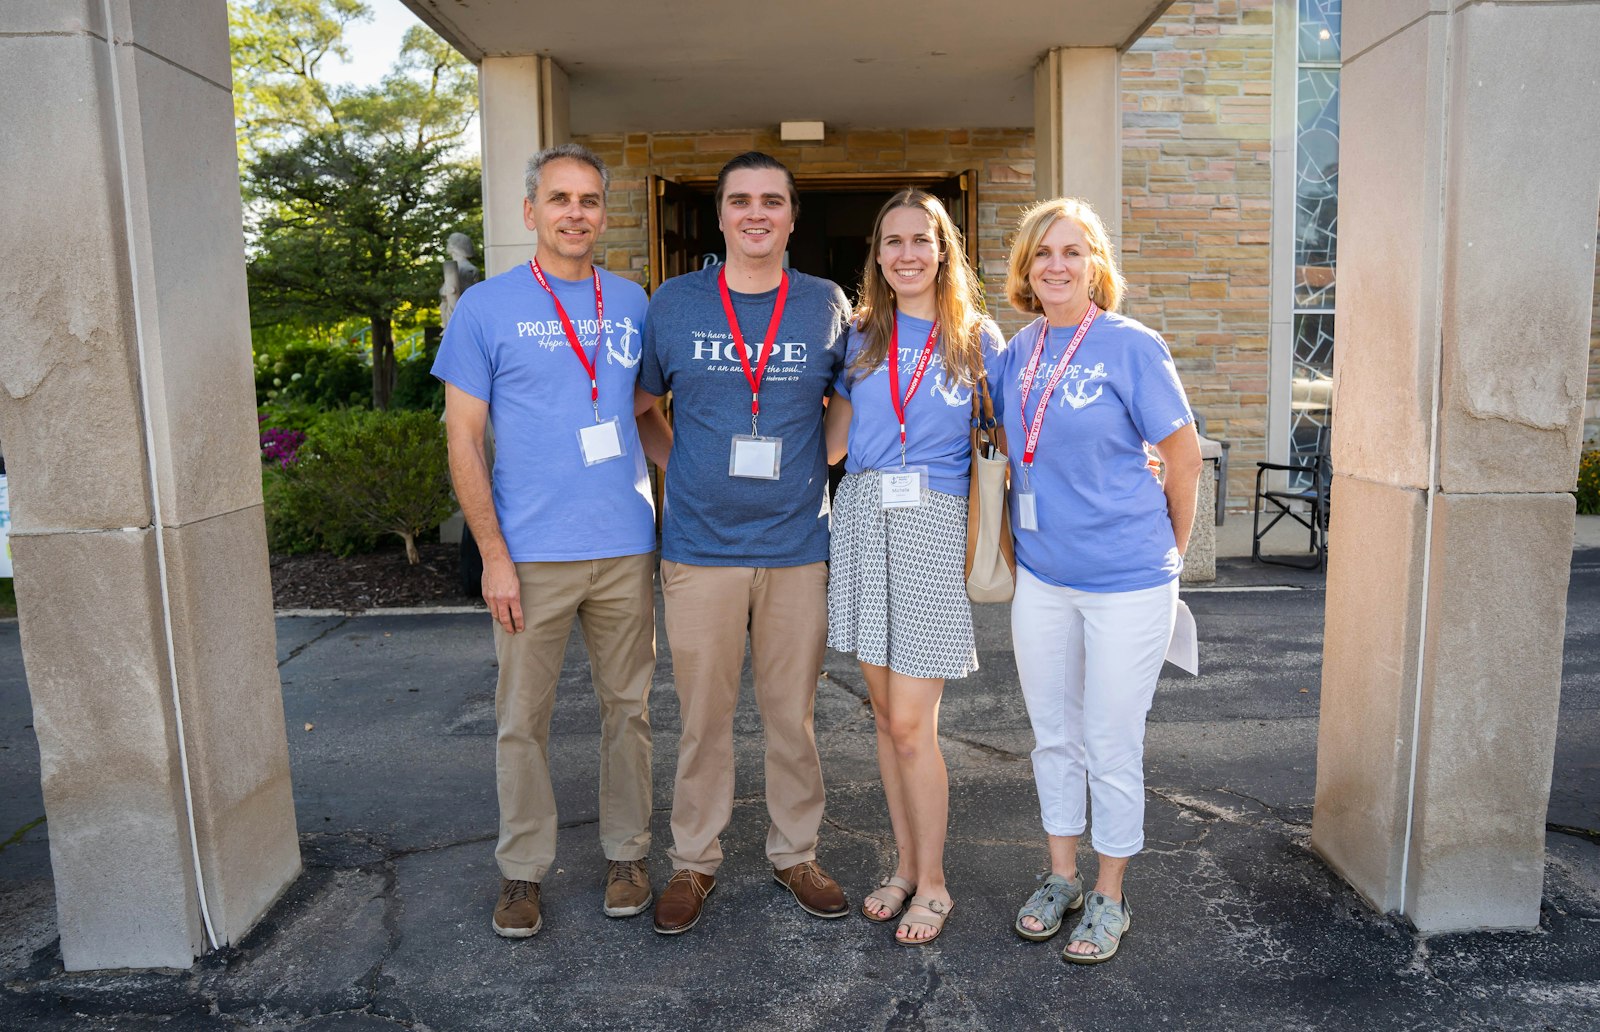 Tom Vismara (center left), along with his wife, Michelle, and parents, John and Lisa, volunteered to take over organizing this year's event. The family, which has had its own struggles with cancer, spent the weekend of Aug. 27-28 recruiting participants for this year's "5K and Pray" event at St. Clare of Montefalco Parish in Grosse Pointe Park. (Valaurian Waller | Detroit Catholic)